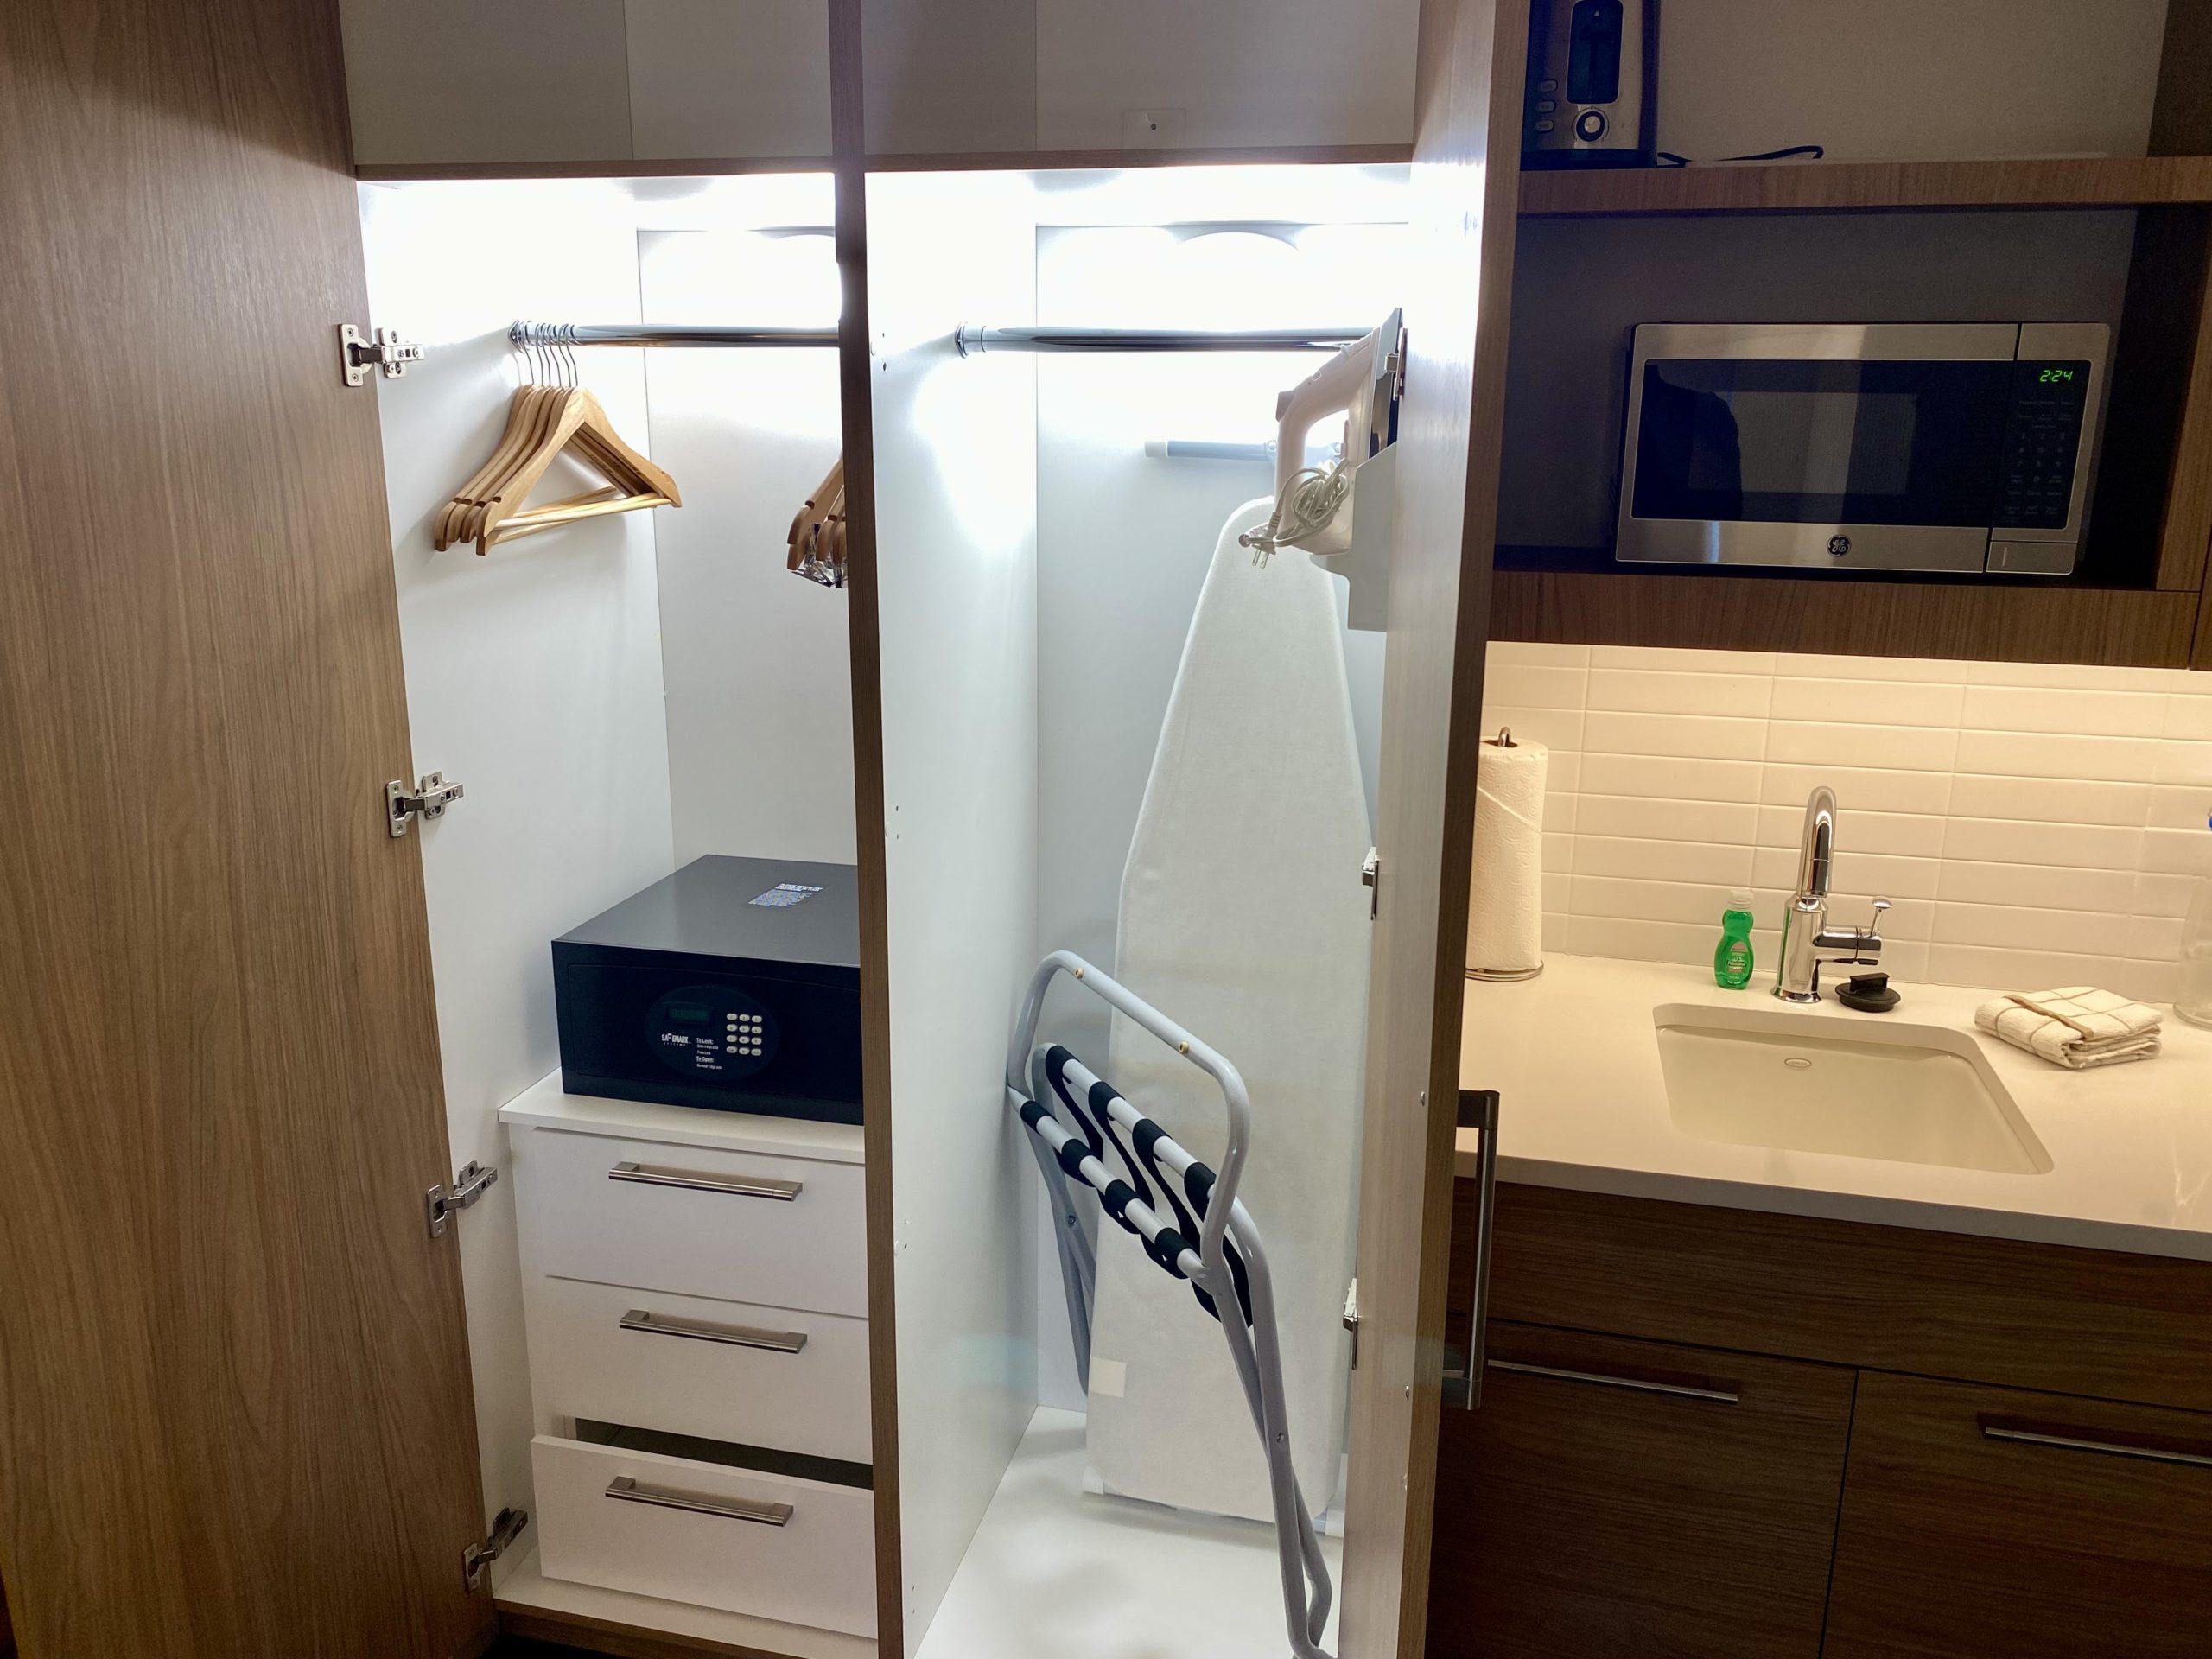 a closet with a white ironing board and a microwave